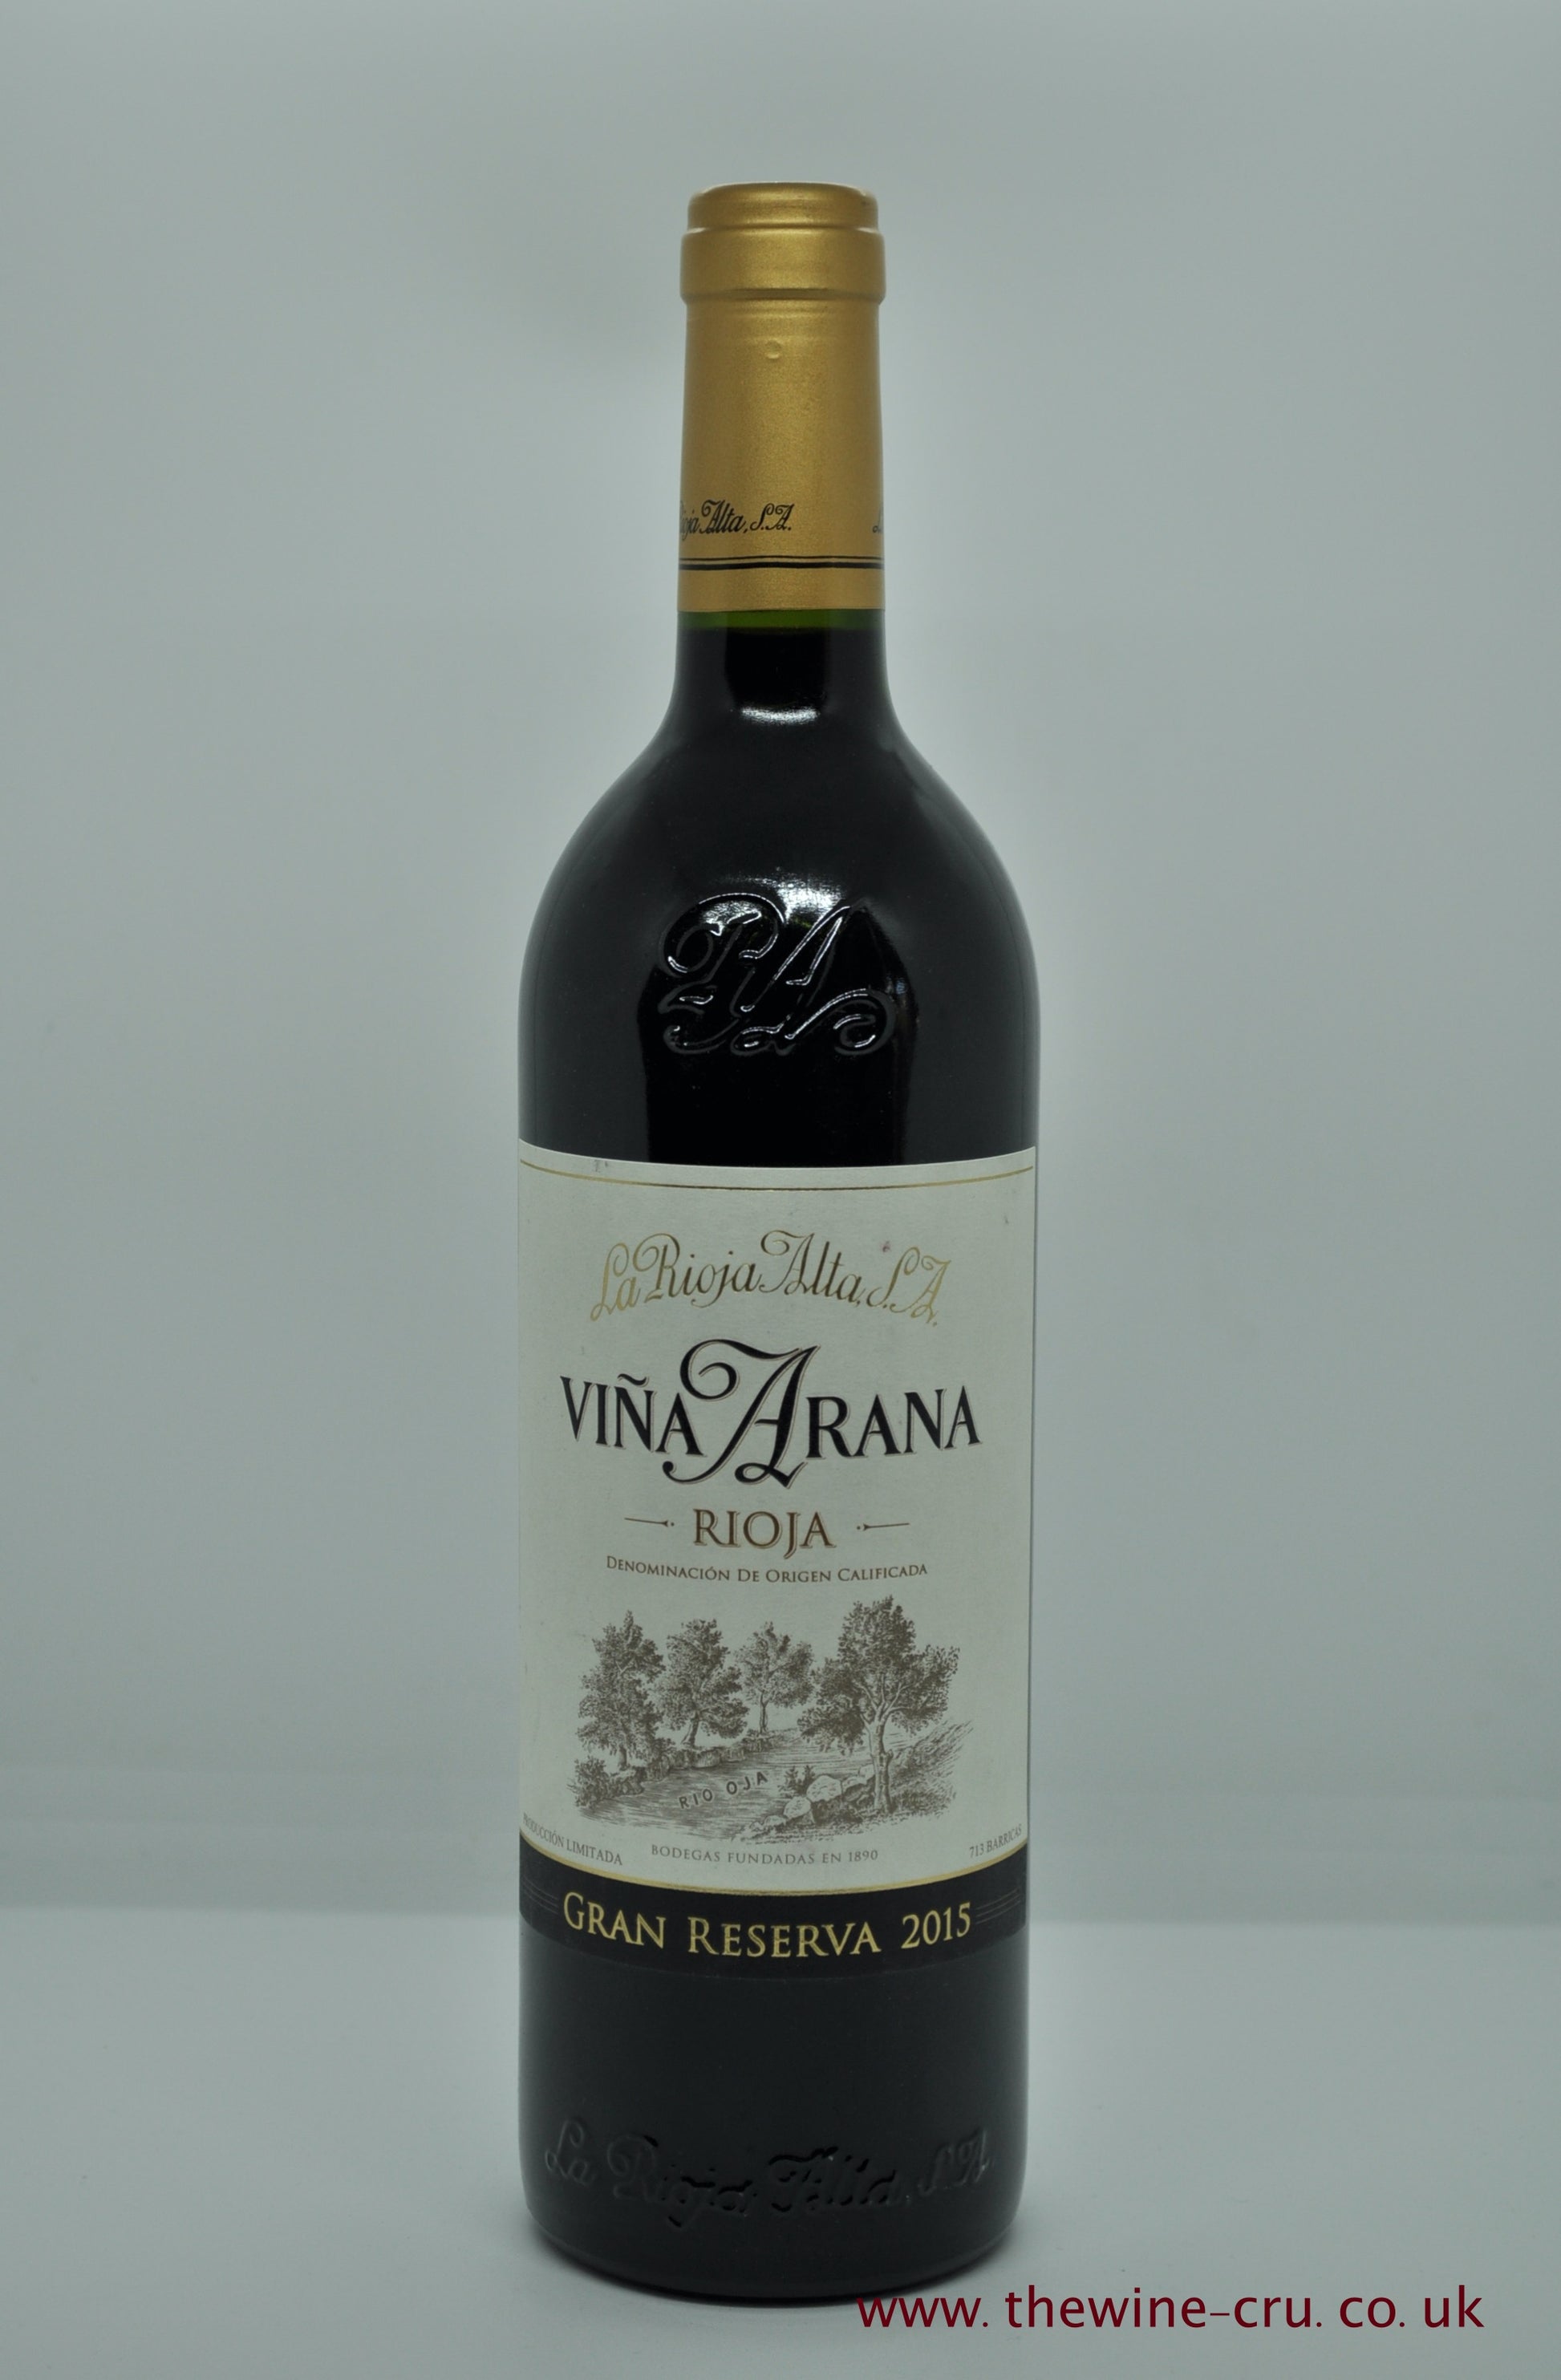 2015 vintage red wine. La Rioja Alta S.A. Vina Arana Gran Reserva 2015. Spain. Immediate delivery. Free local delivery. Gift wrapping available.